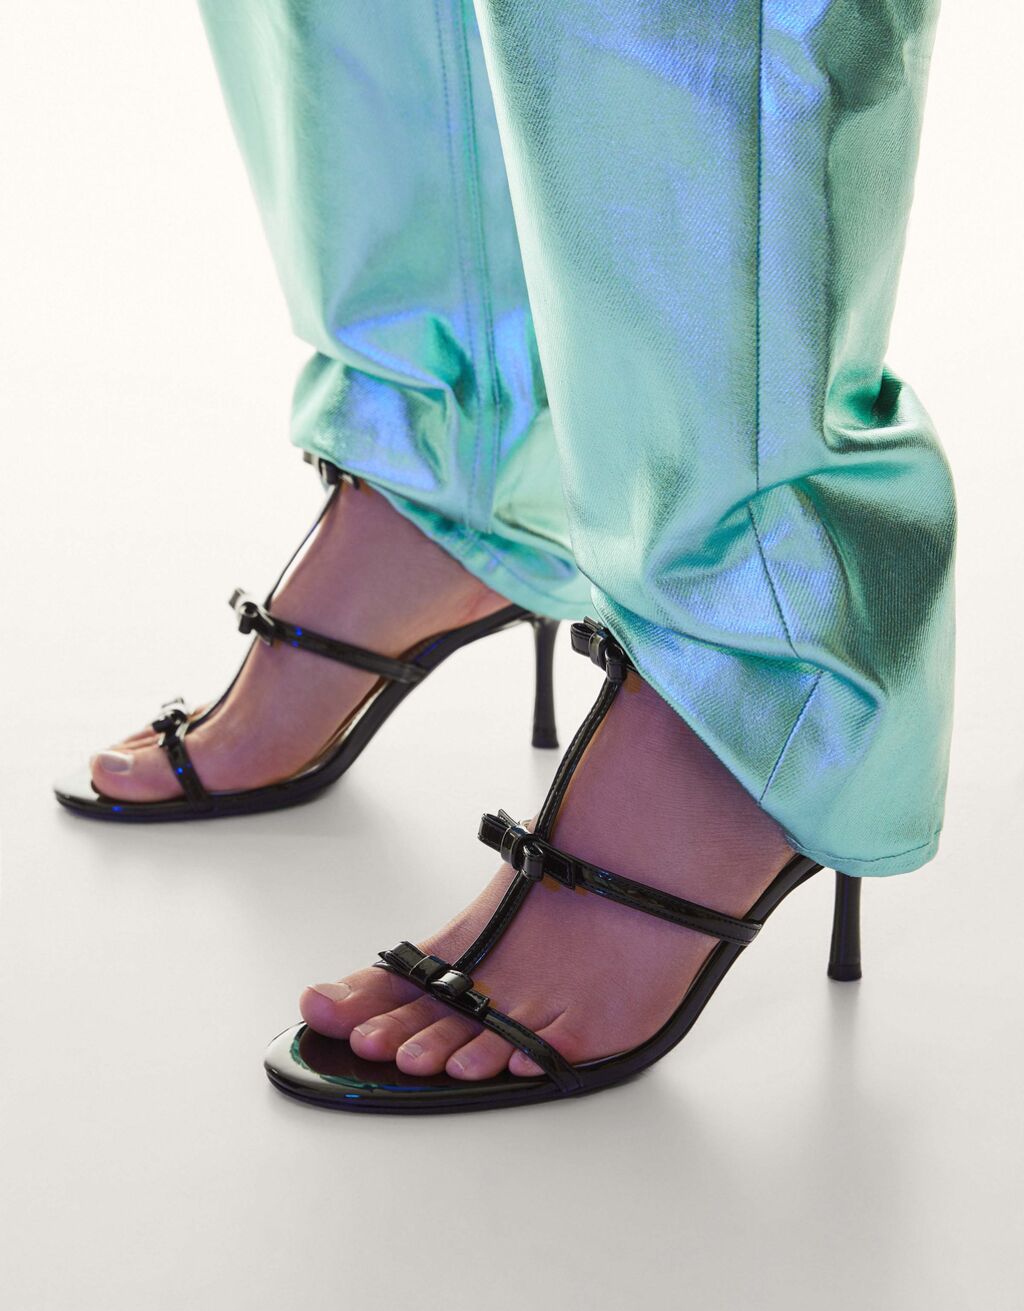 High-heel sandals with bows